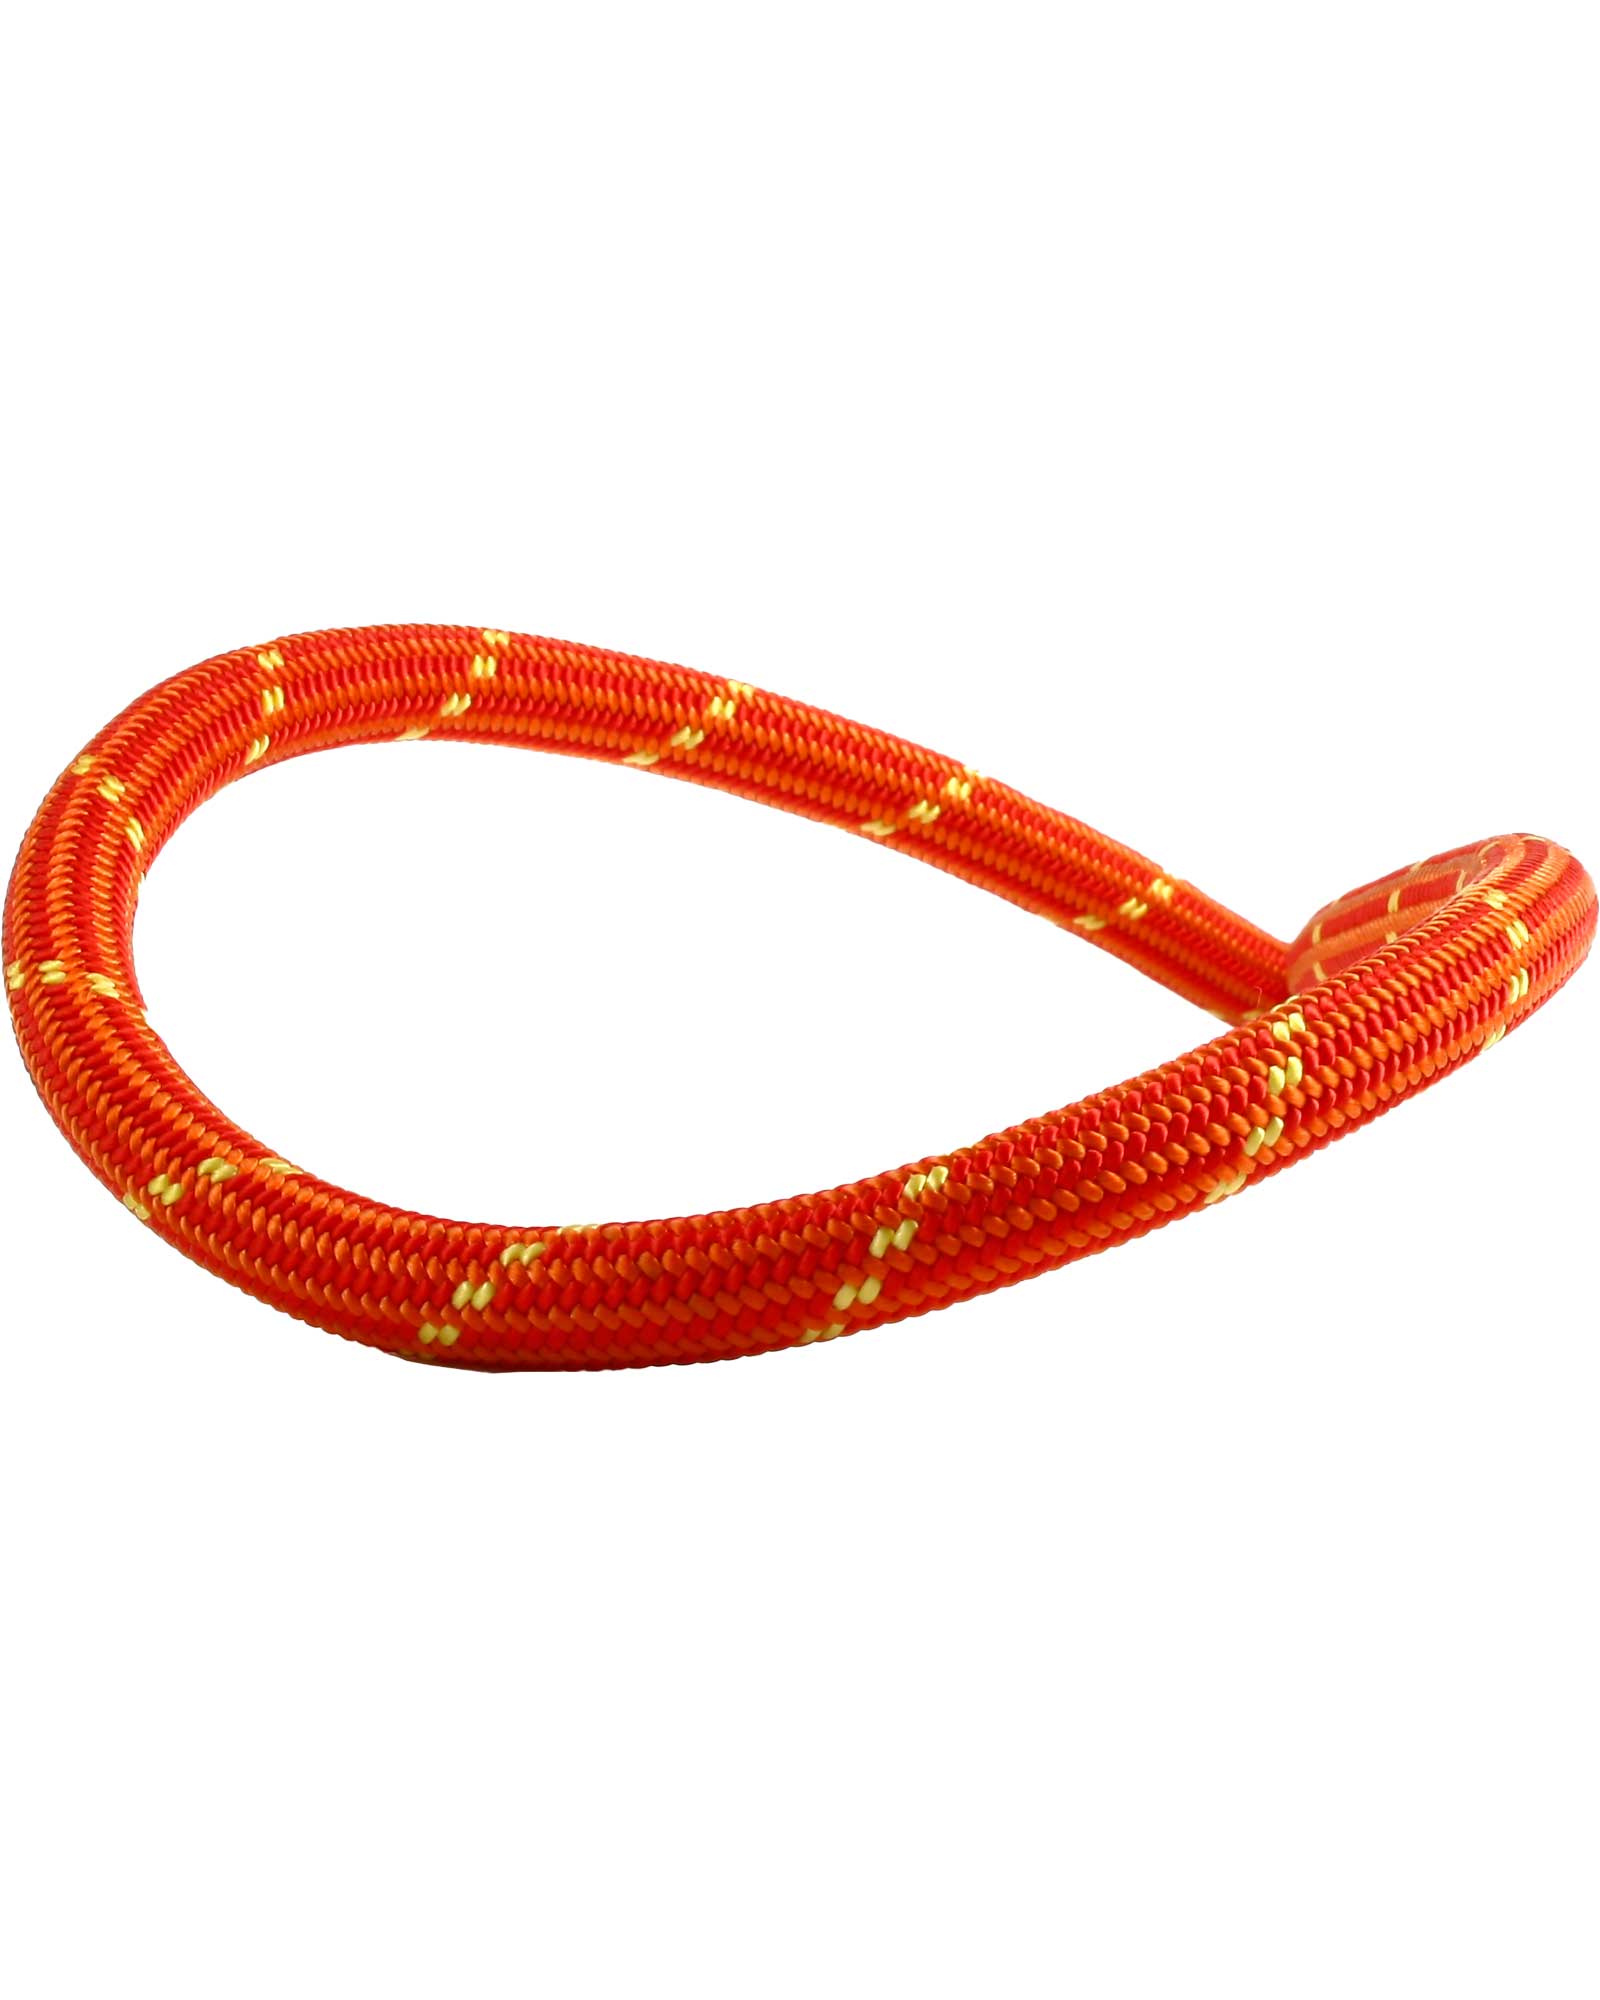 Edelweiss Energy 9.5mm X 70m Rope